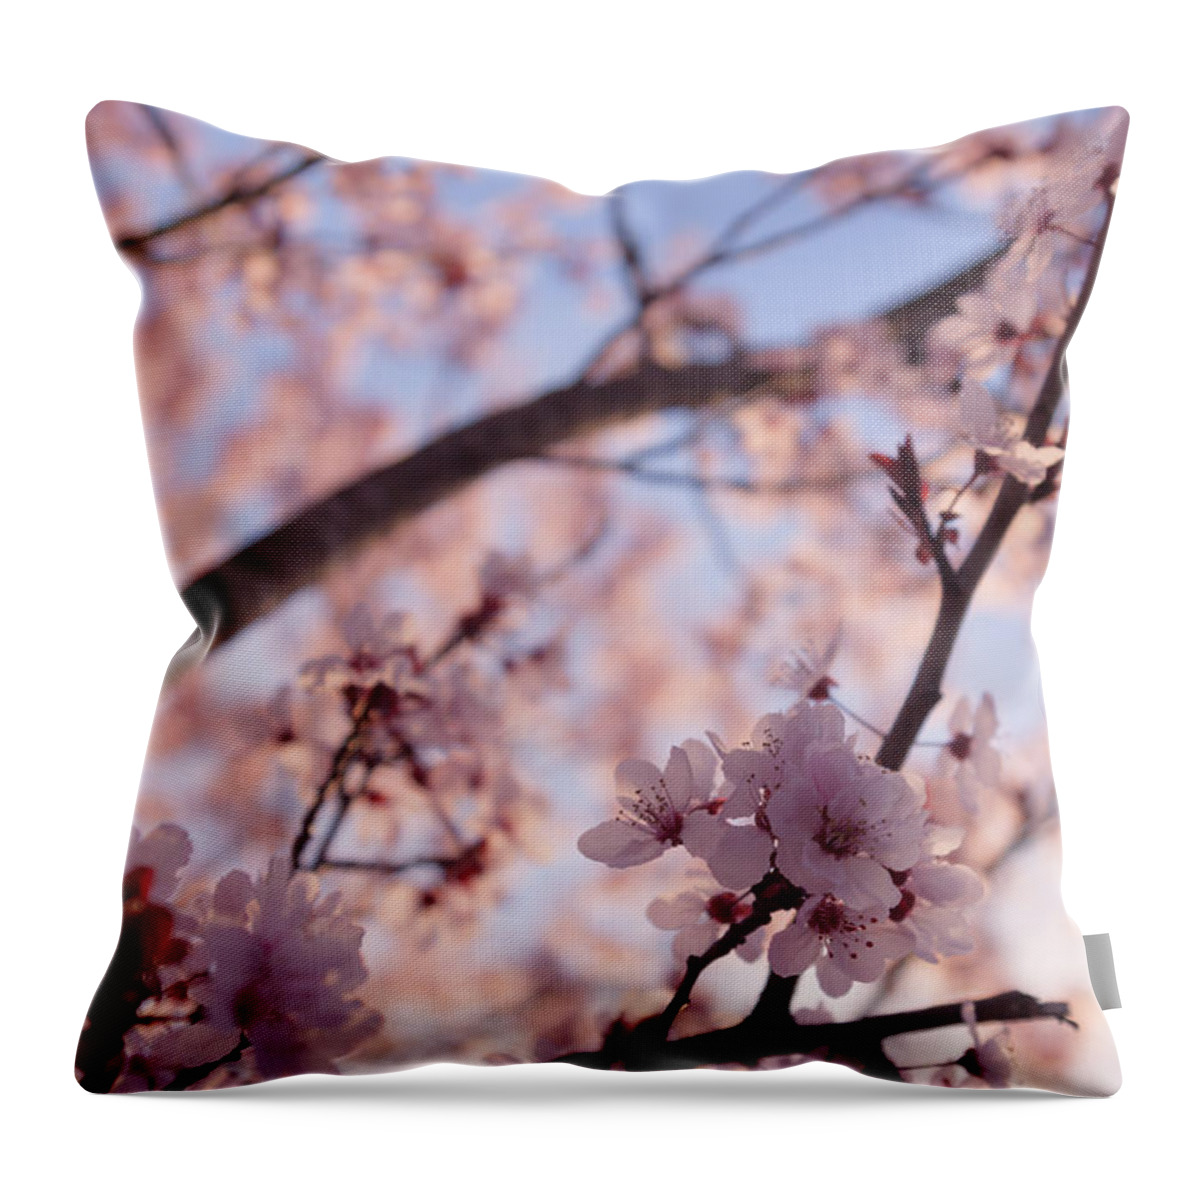 Cherry Blossoms Throw Pillow featuring the photograph Pink Cherry Blossoms by Ana V Ramirez